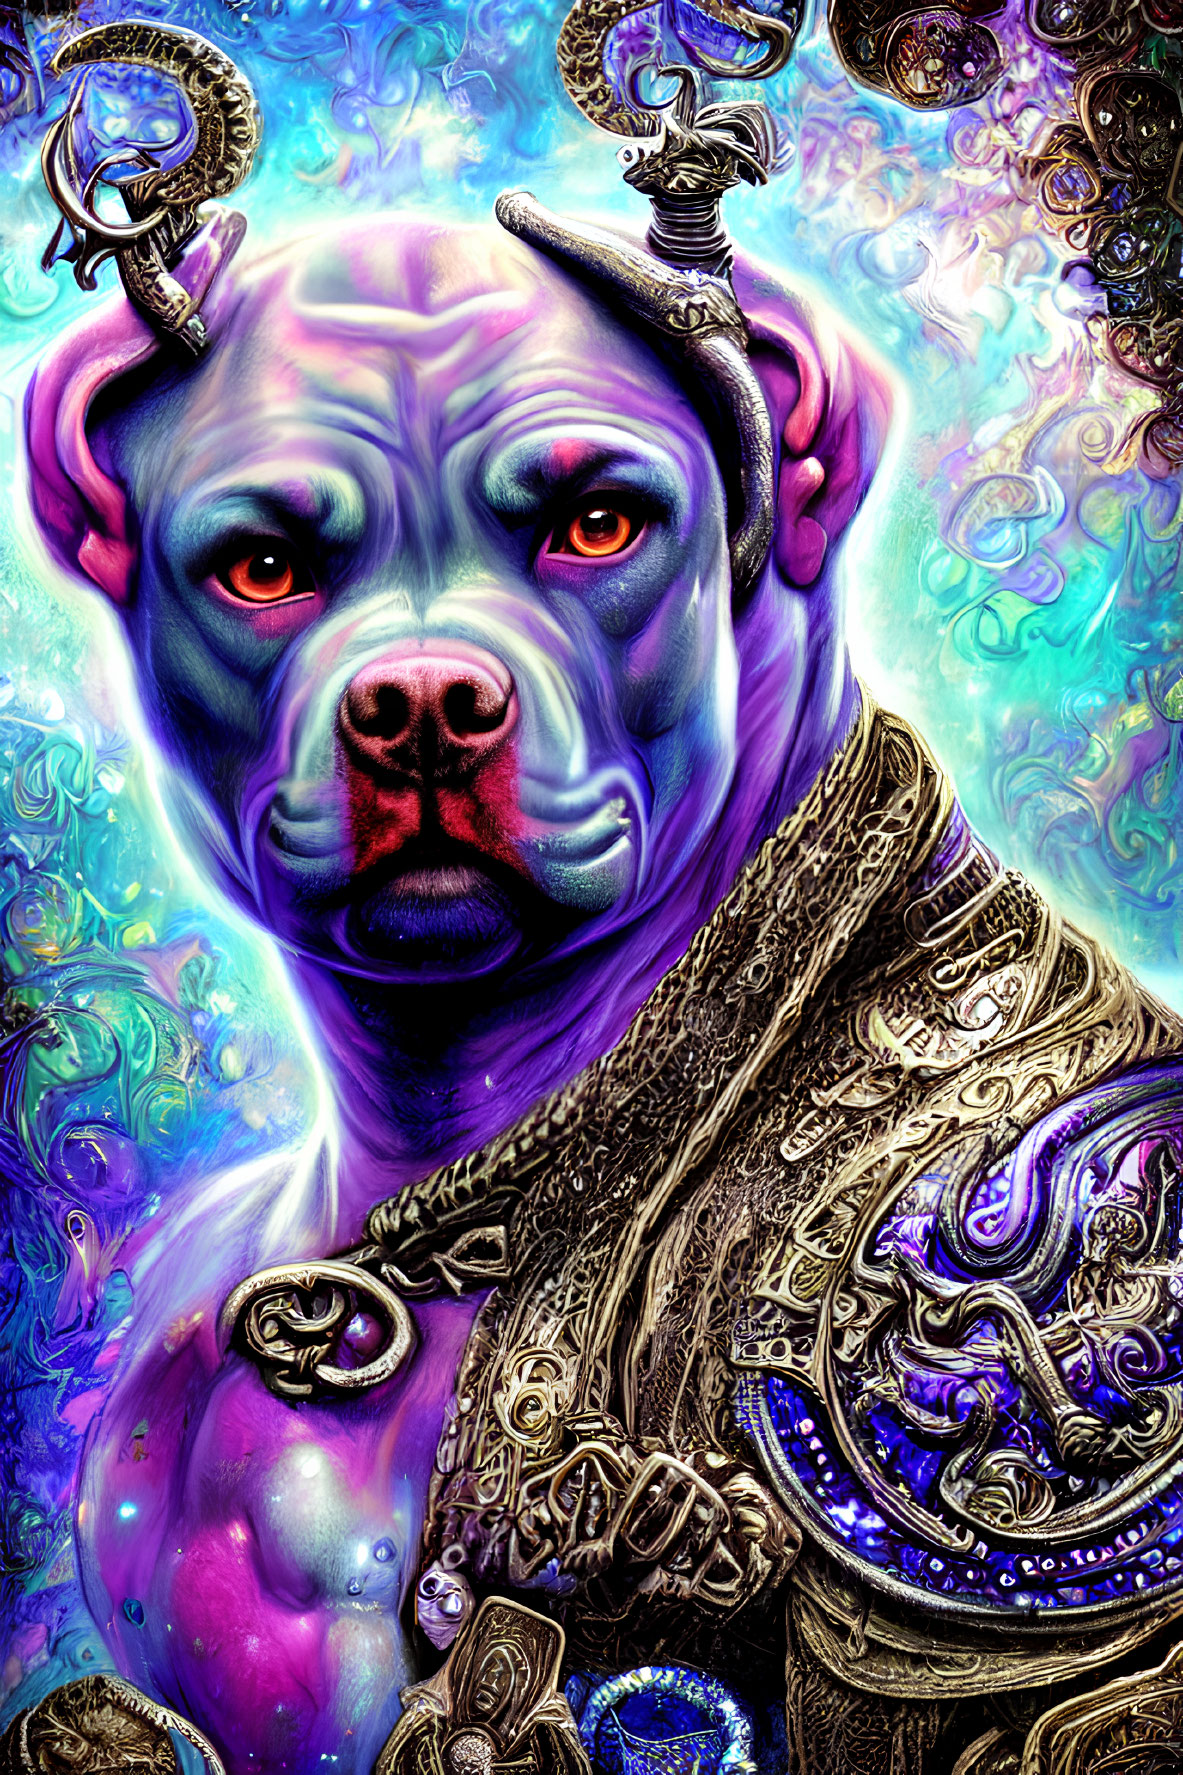 Colorful fantasy artwork of a dog in ornate armor with human-like eyes